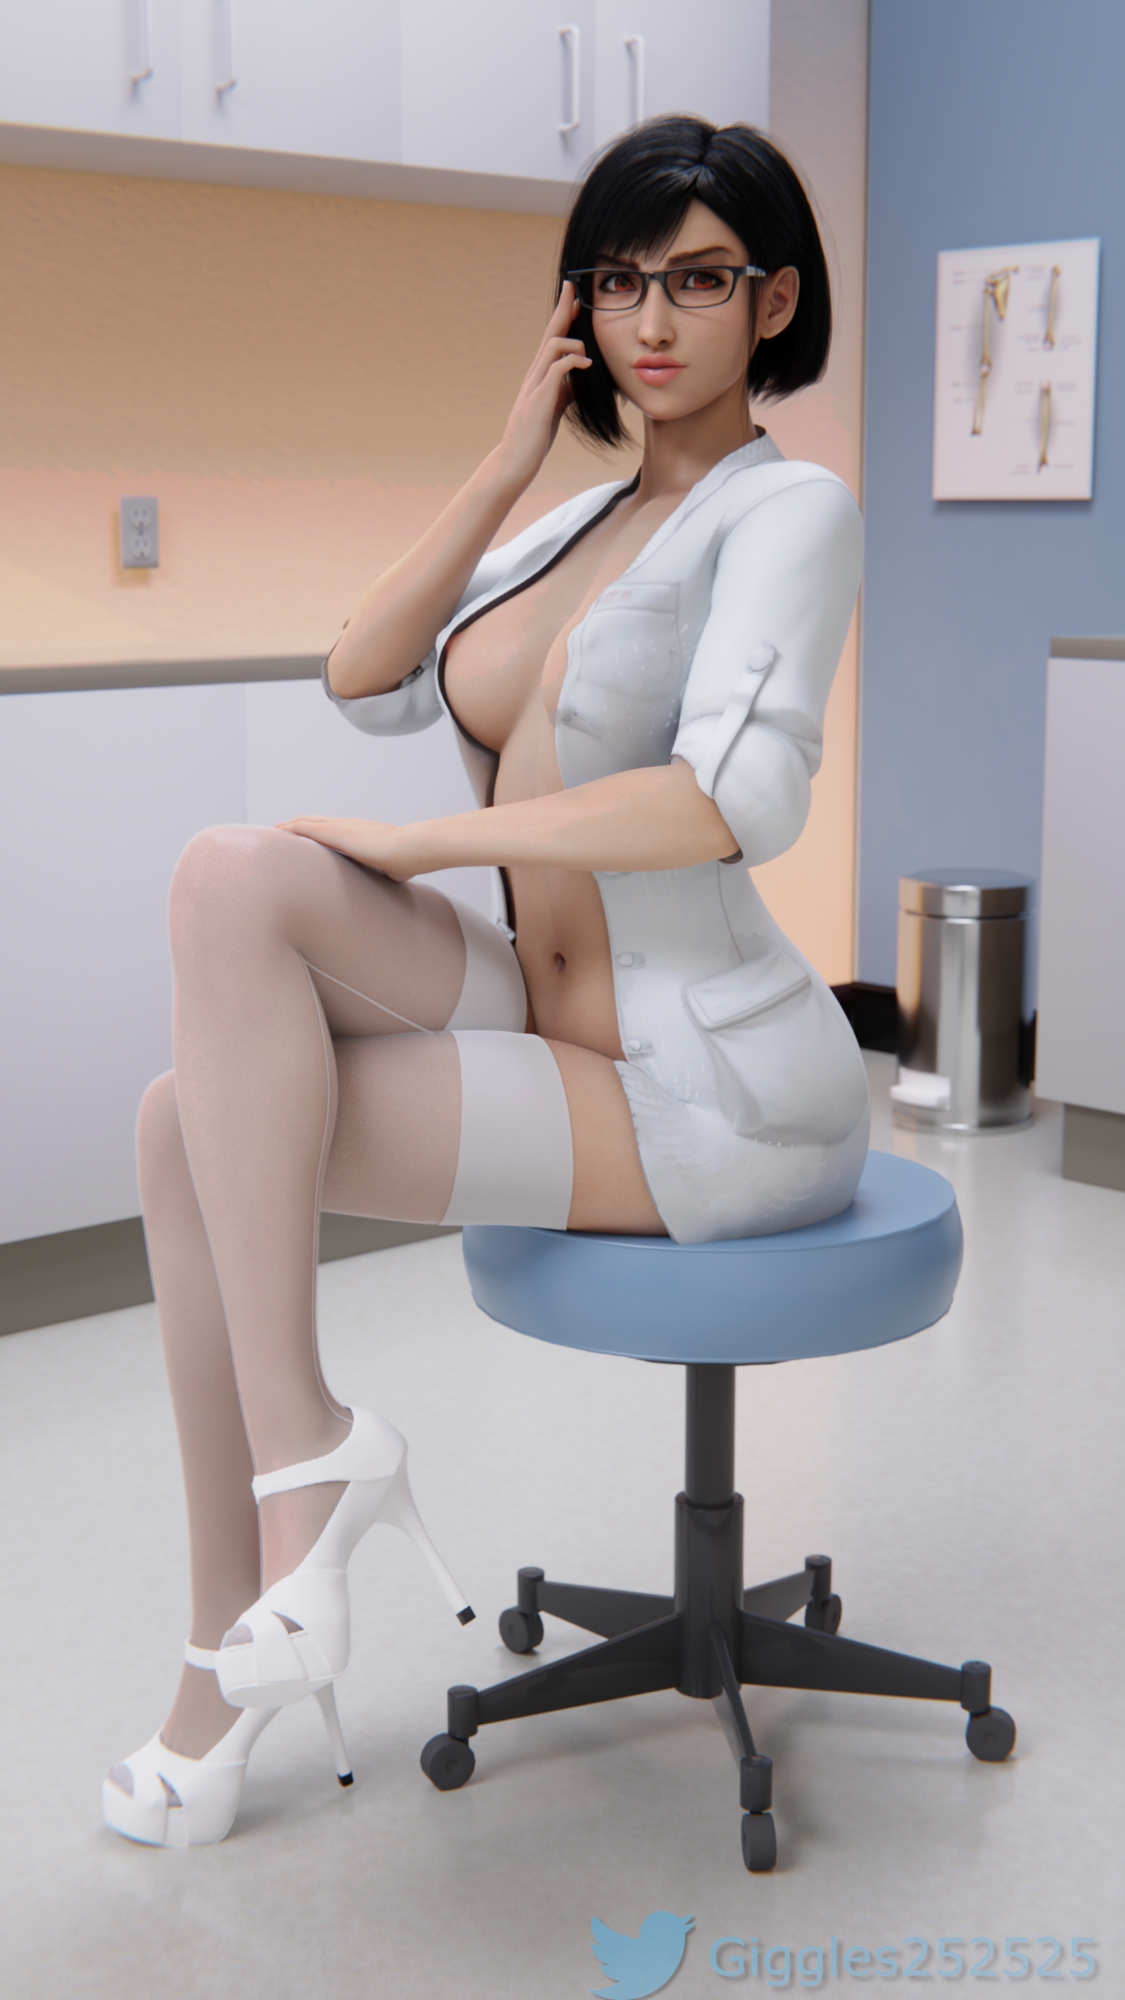 The doctor will see you now Tifa Lockhart Tifa Final Fantasy Final Fantasy 7 Final Fantasy 7 Remake Final Fantasy VII Posing Pose Huge Boobs Big Tits Big Breasts Doctor